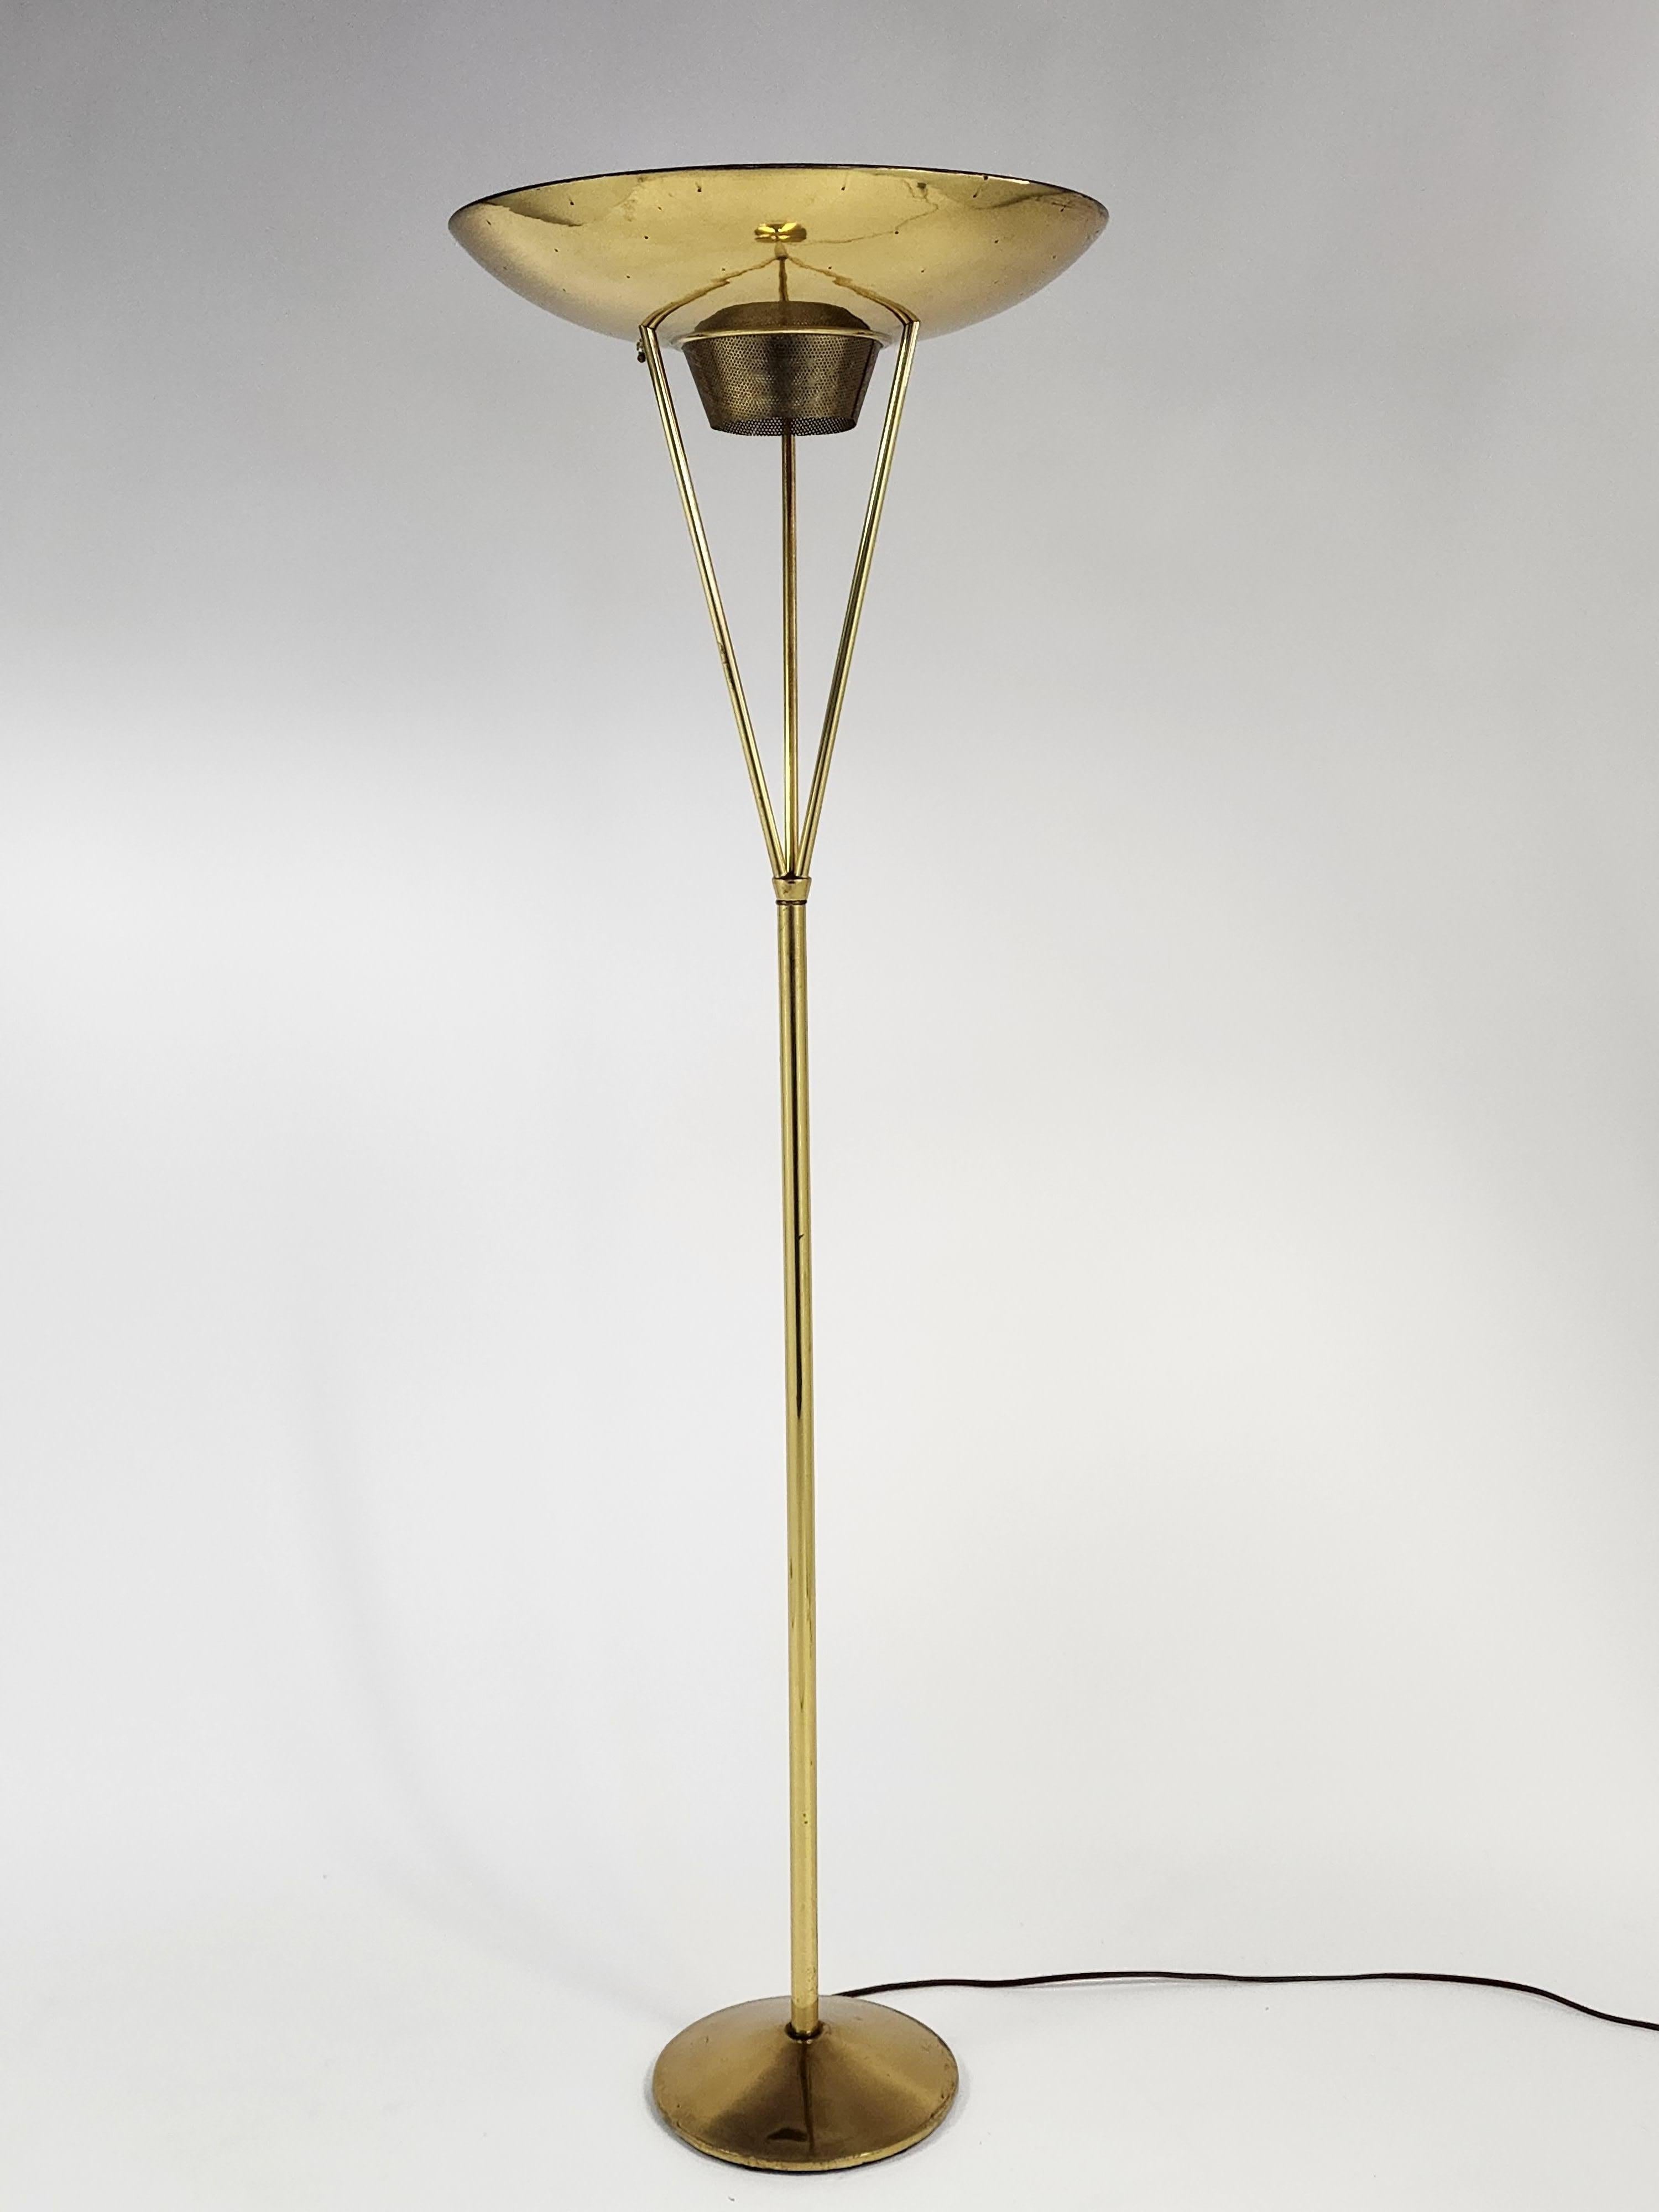 Elegant, minimalist 1950s pierced brass floor lamp in the style of Lightolier. 

Contain 3 E26 size socket rated at 60 watt each. 

Rotating 3 way switch on shade . 1, 2 or 3 lights on or off.